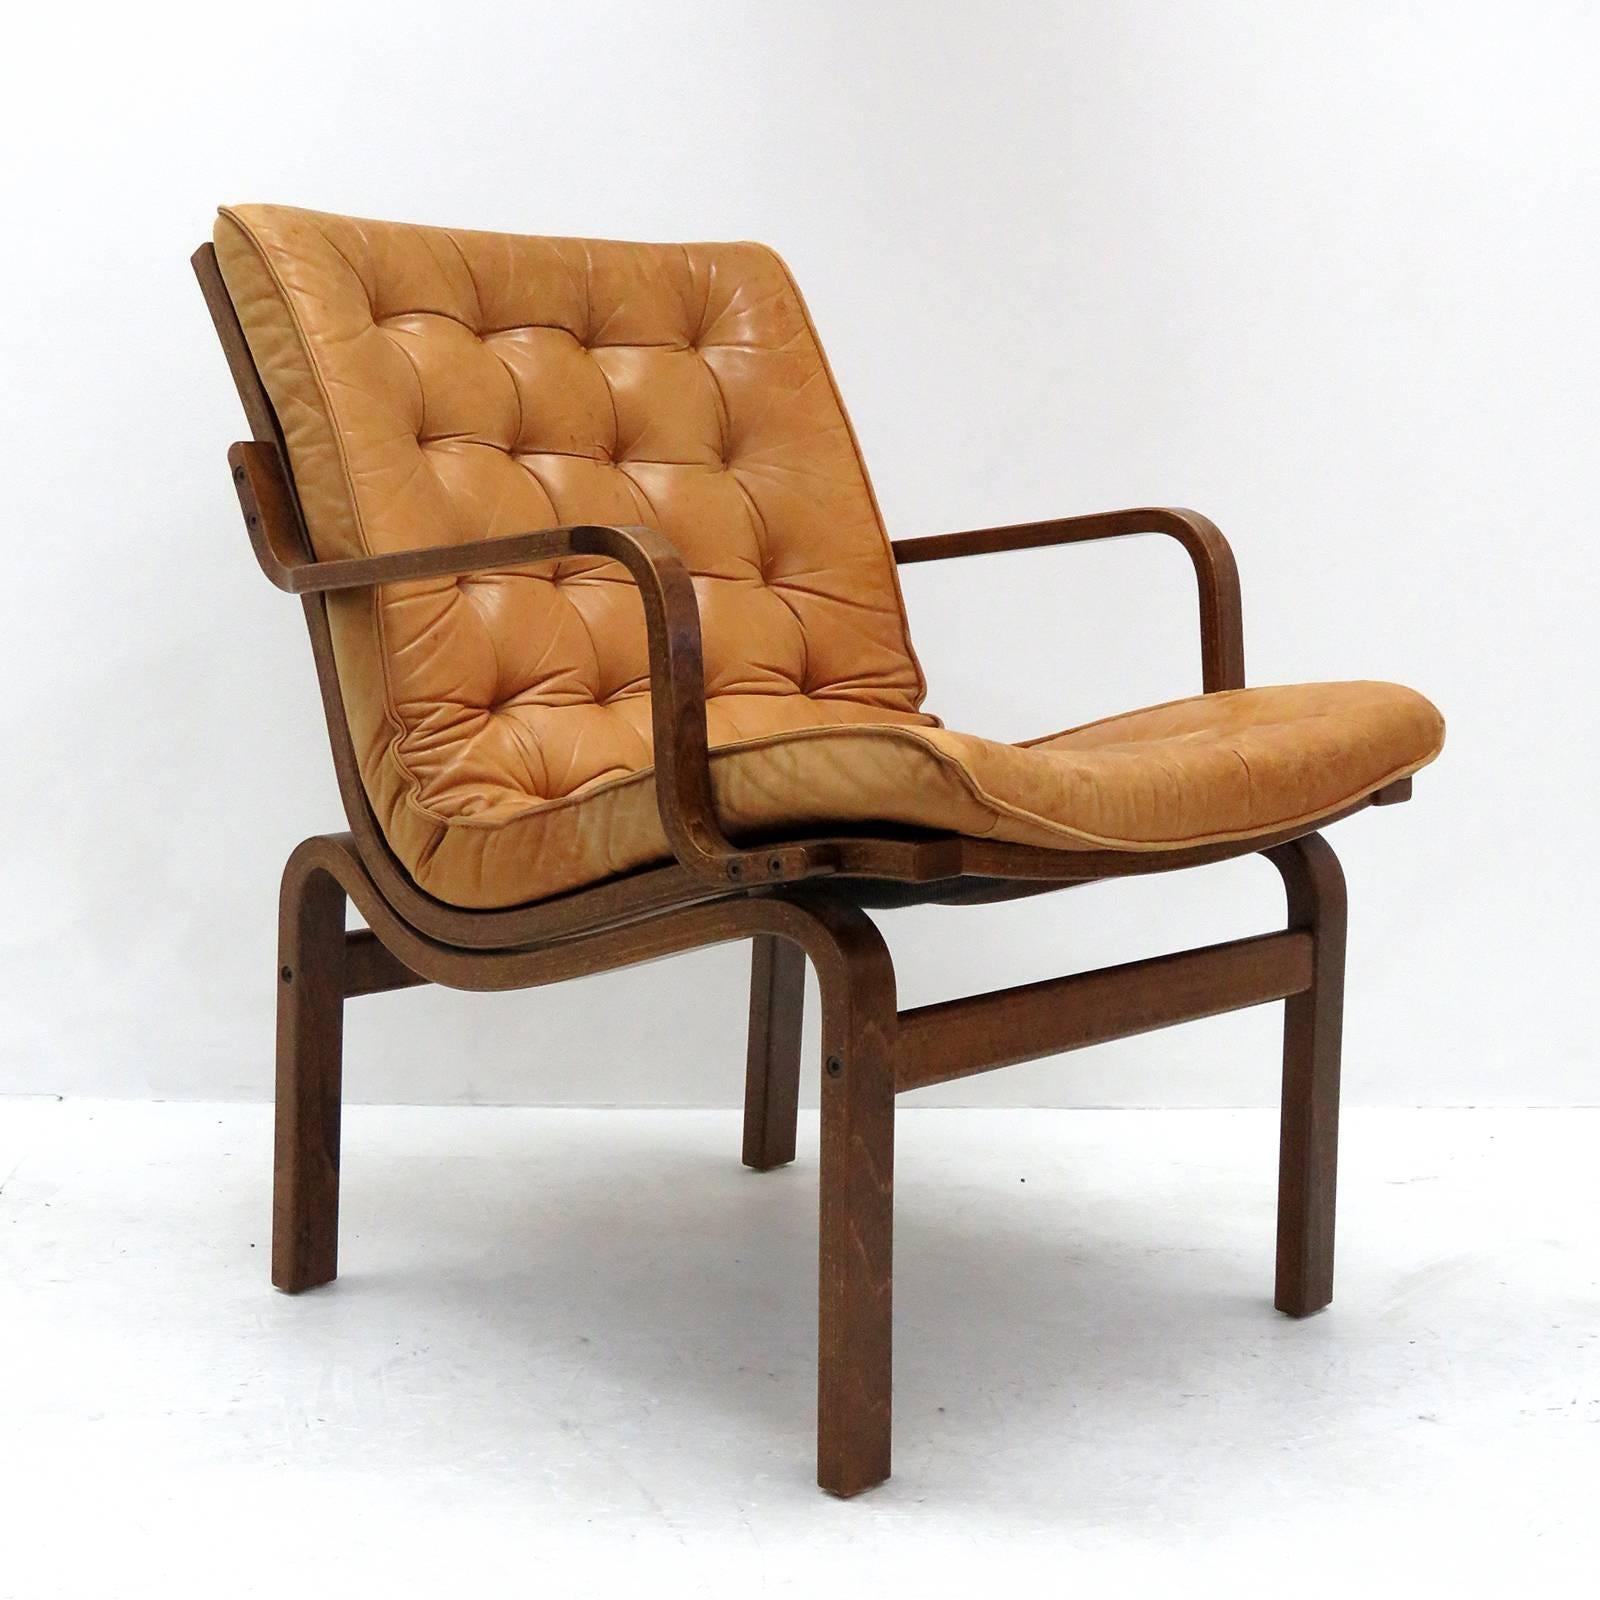 Striking 1950s Danish bentwood chairs, similar to Bruno Mathsson Eva chairs, with cognac colored tufted leather cushions, great patina.